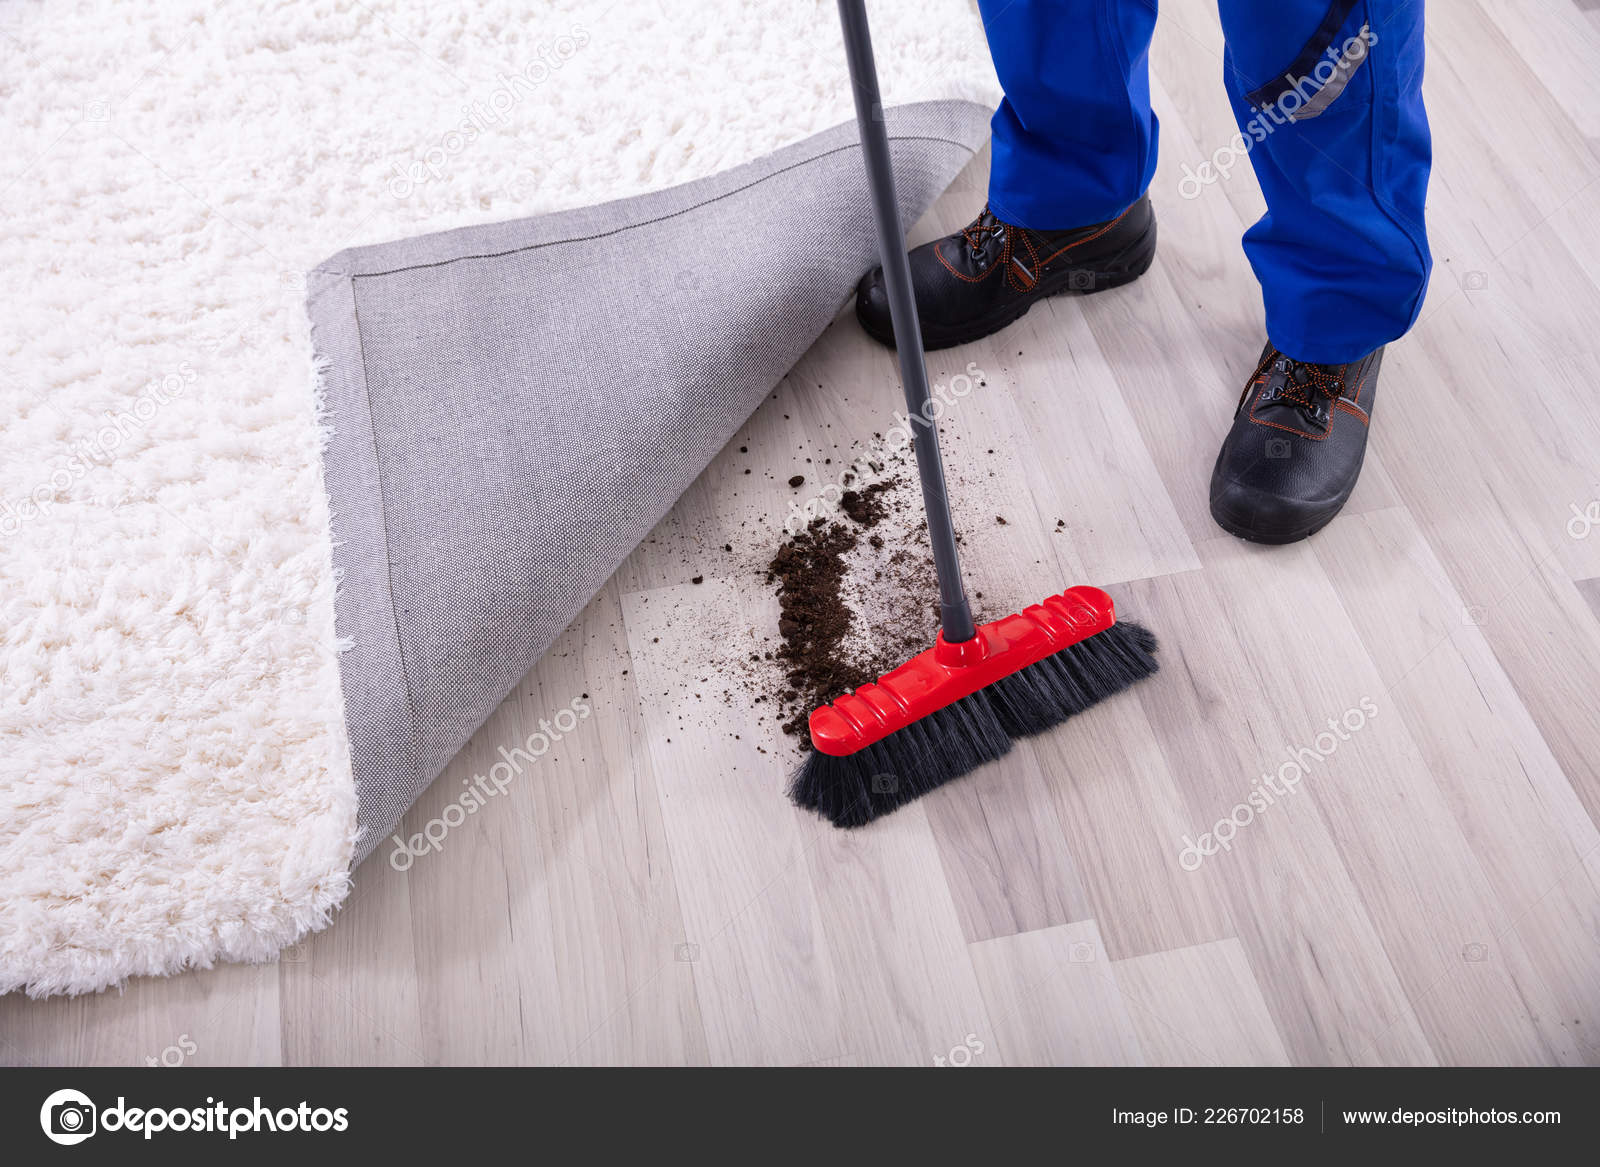 depositphotos_226702158-stock-photo-lowsection-view-janitor-cleaning-dirt.jpg